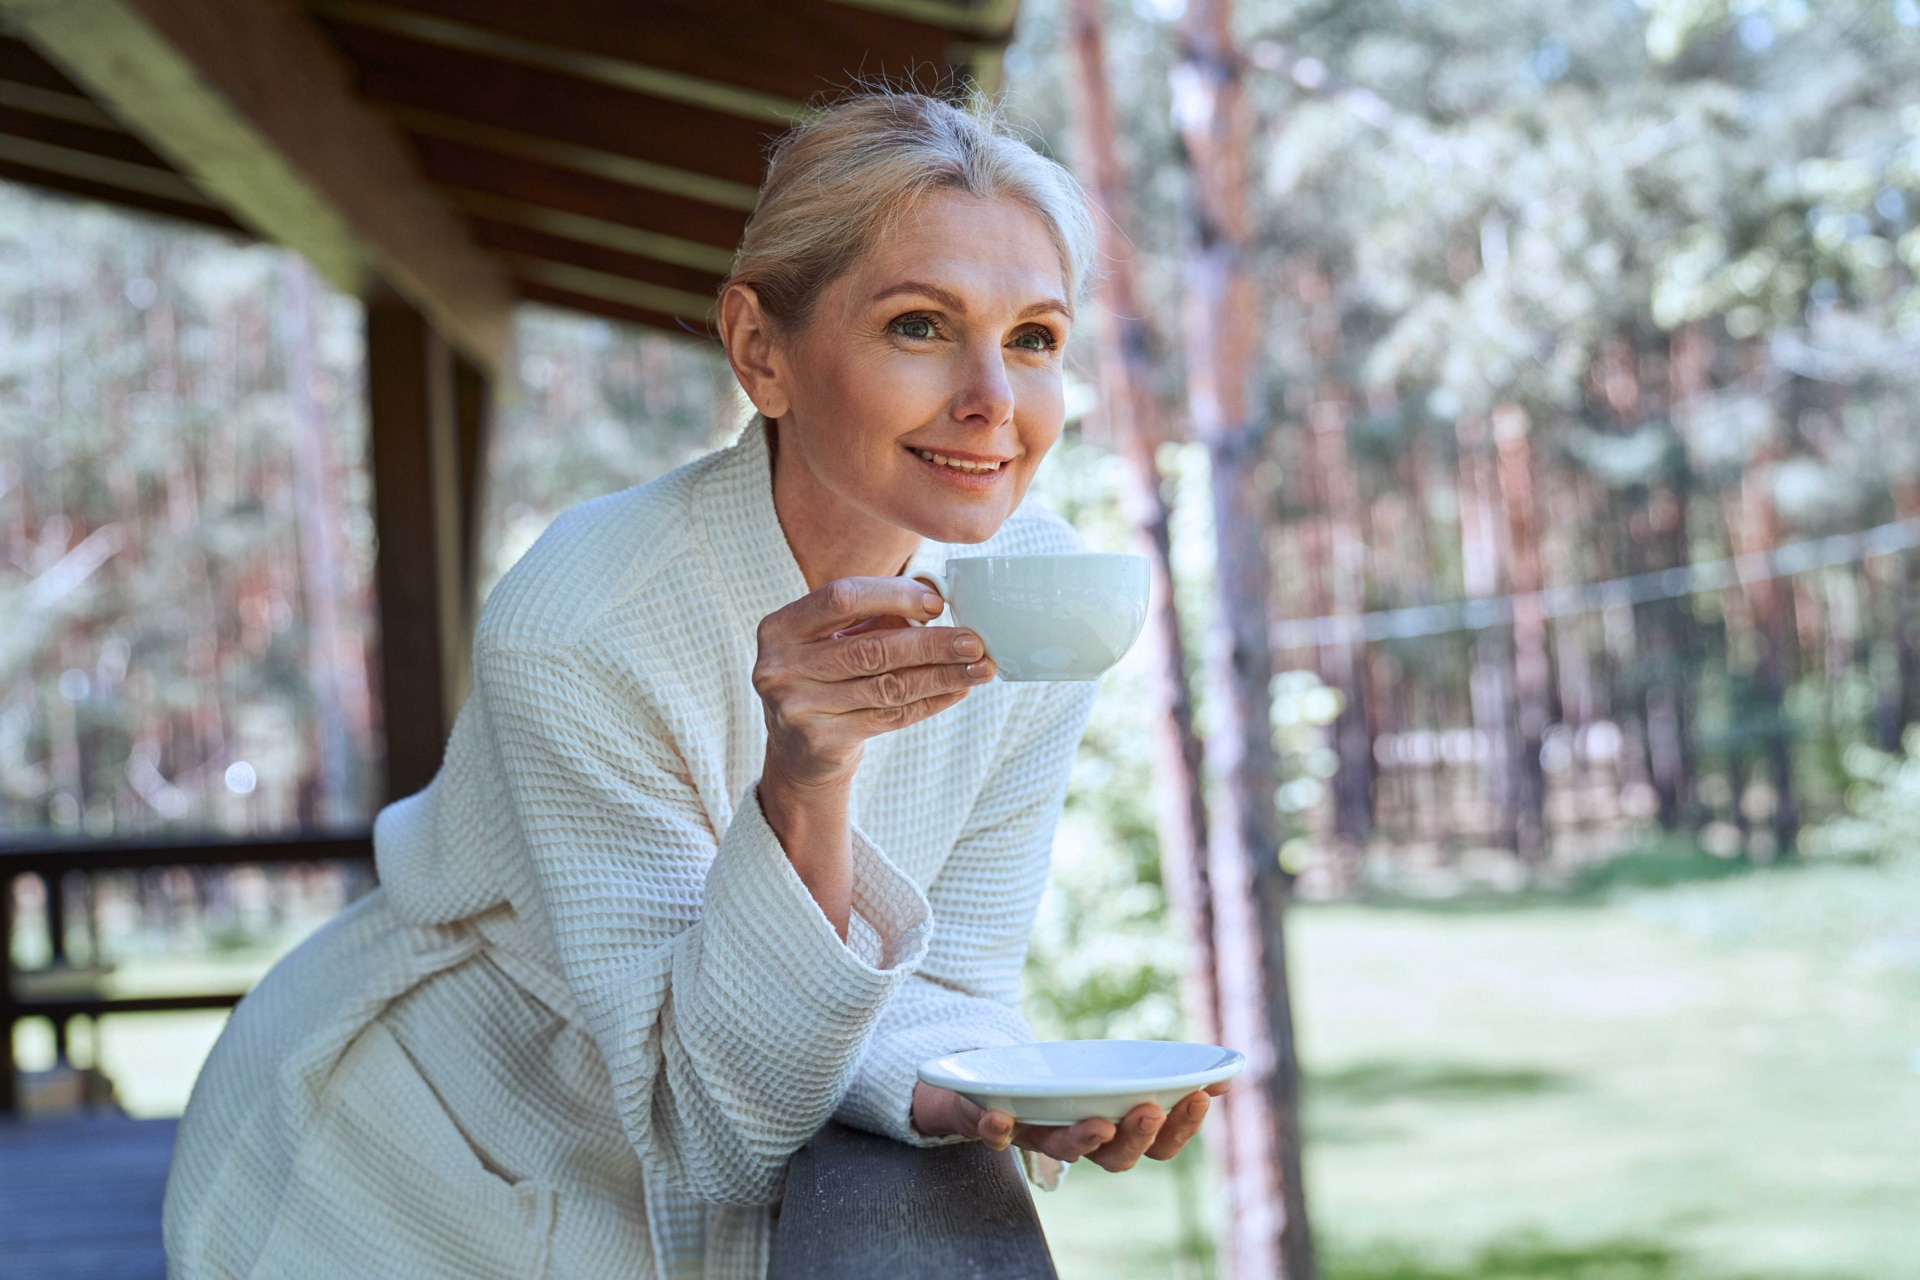 A woman sips coffee on an outdoor patio while listening to nature sounds.